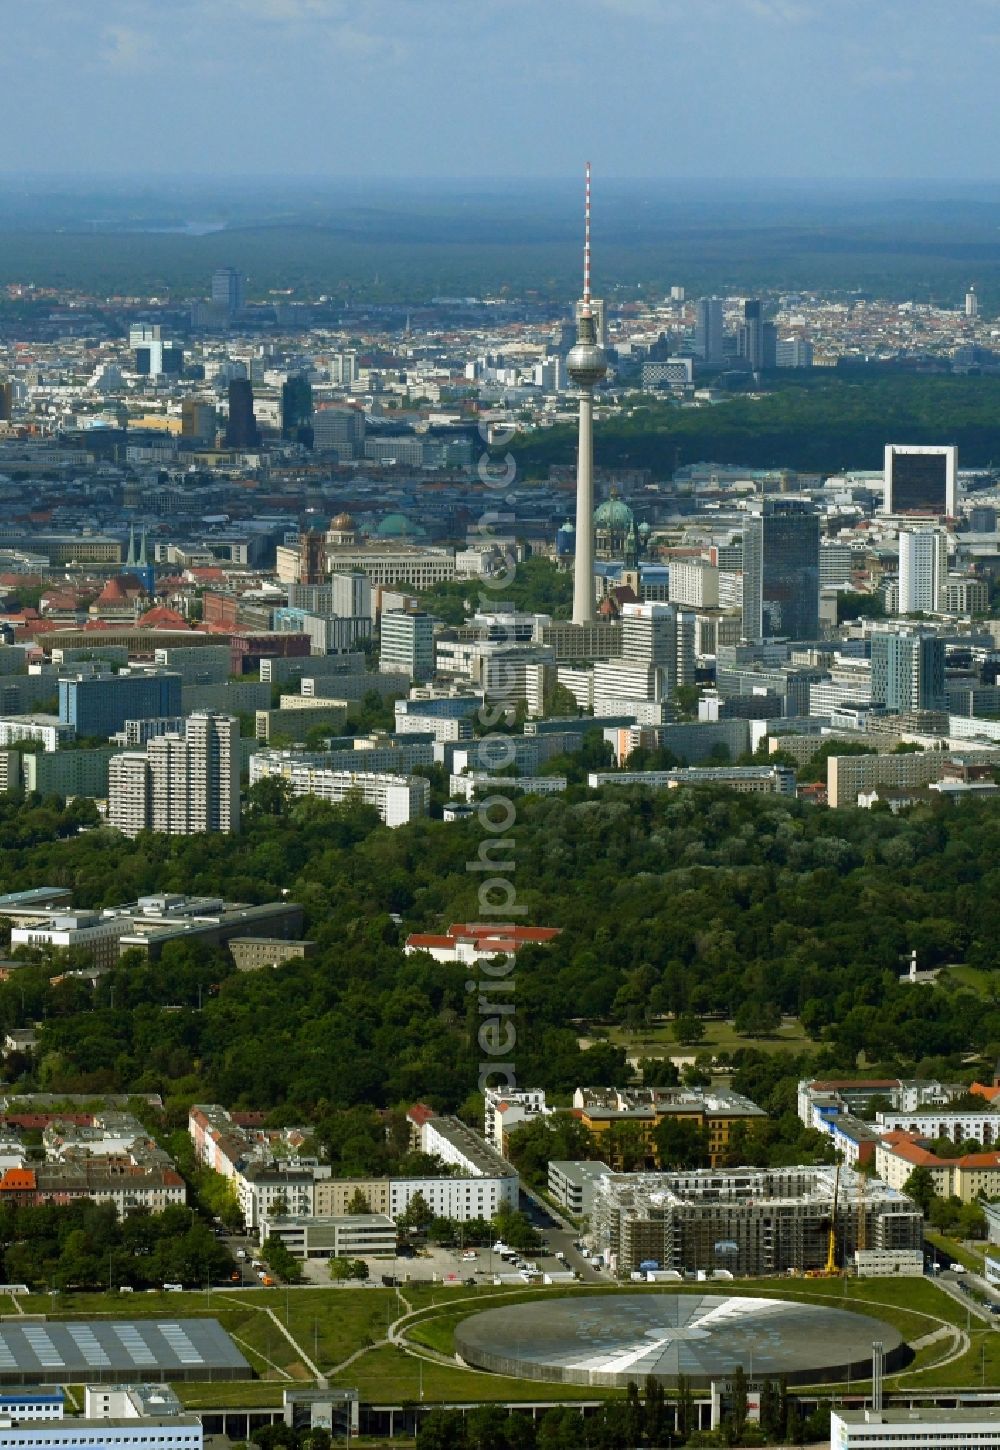 Aerial photograph Berlin - View to the Velodrome at the Landsberger Allee in the Berlin district Prenzlauer Berg. The Velodrome is one of the largest event halls of Berlin and is used for sport events, concerts and other events